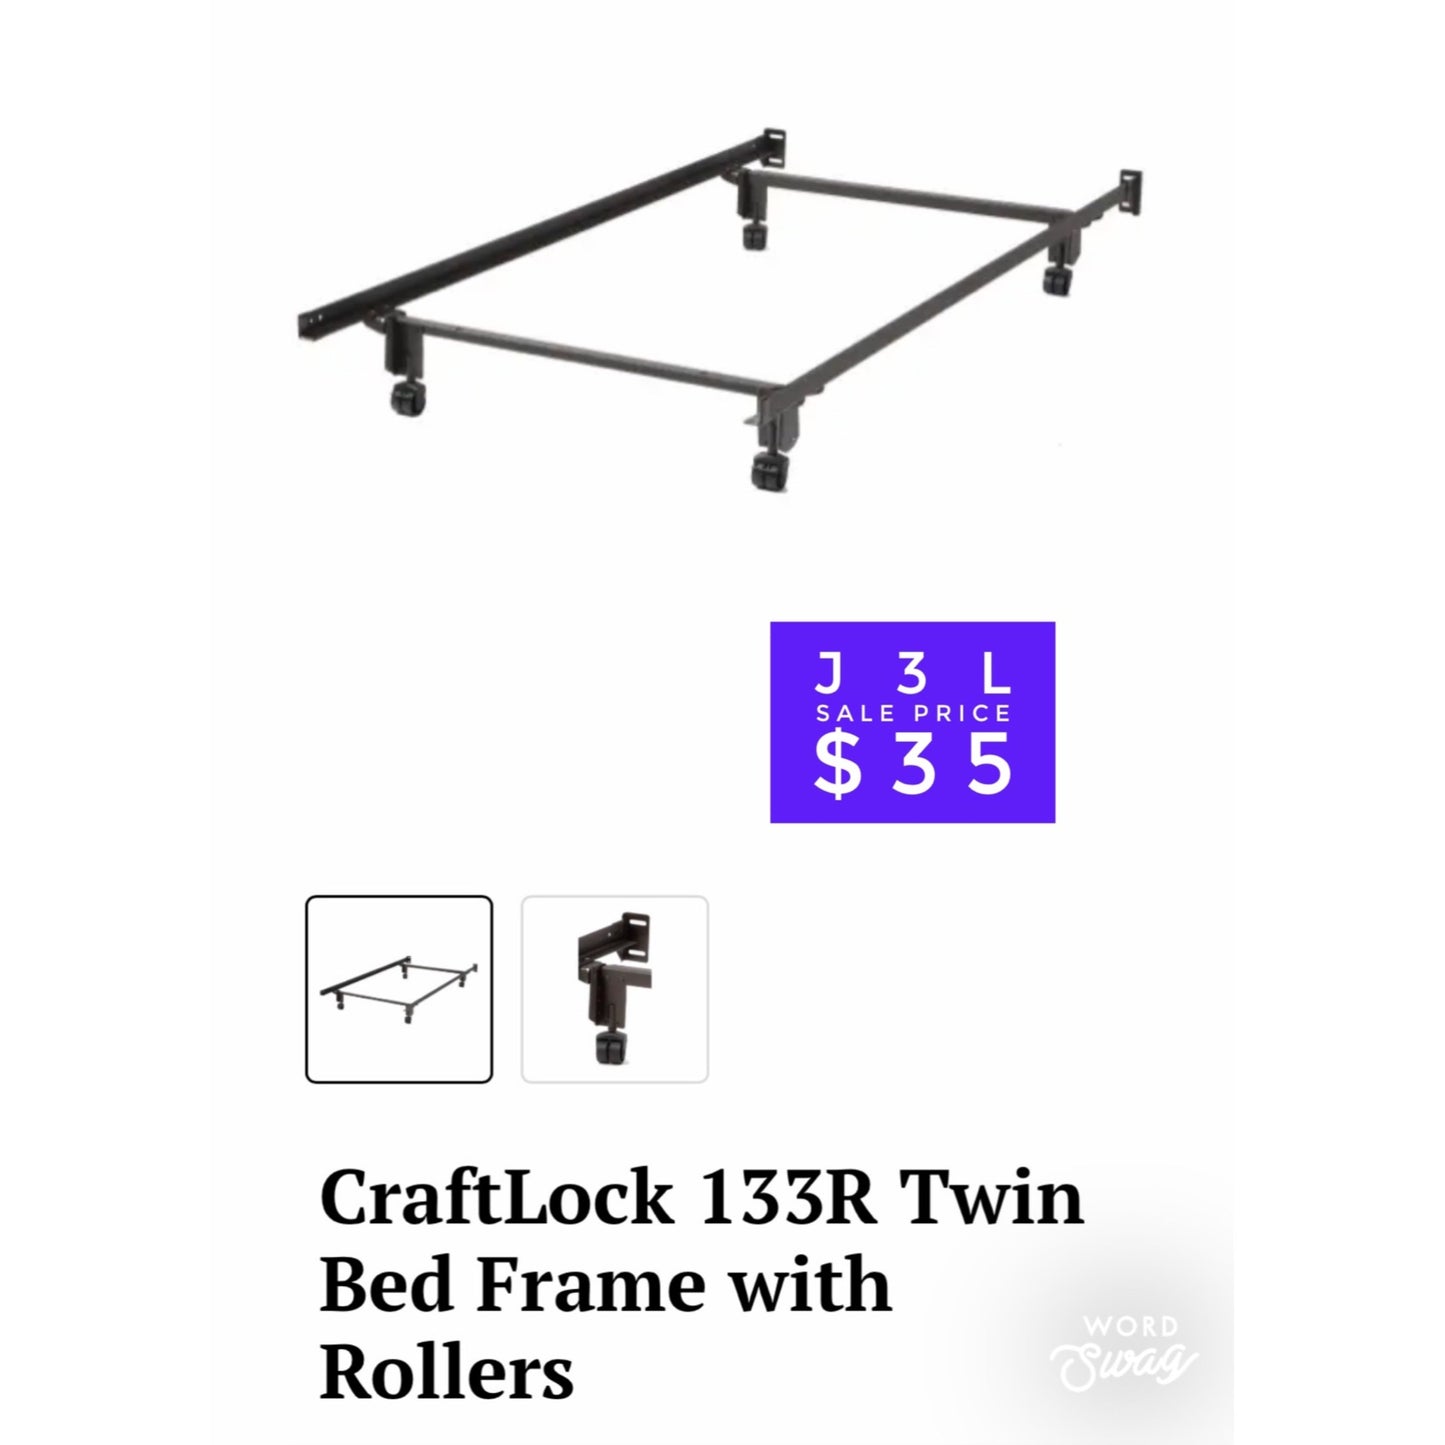 CraftLock 133R Twin Bed Frame with Rollers